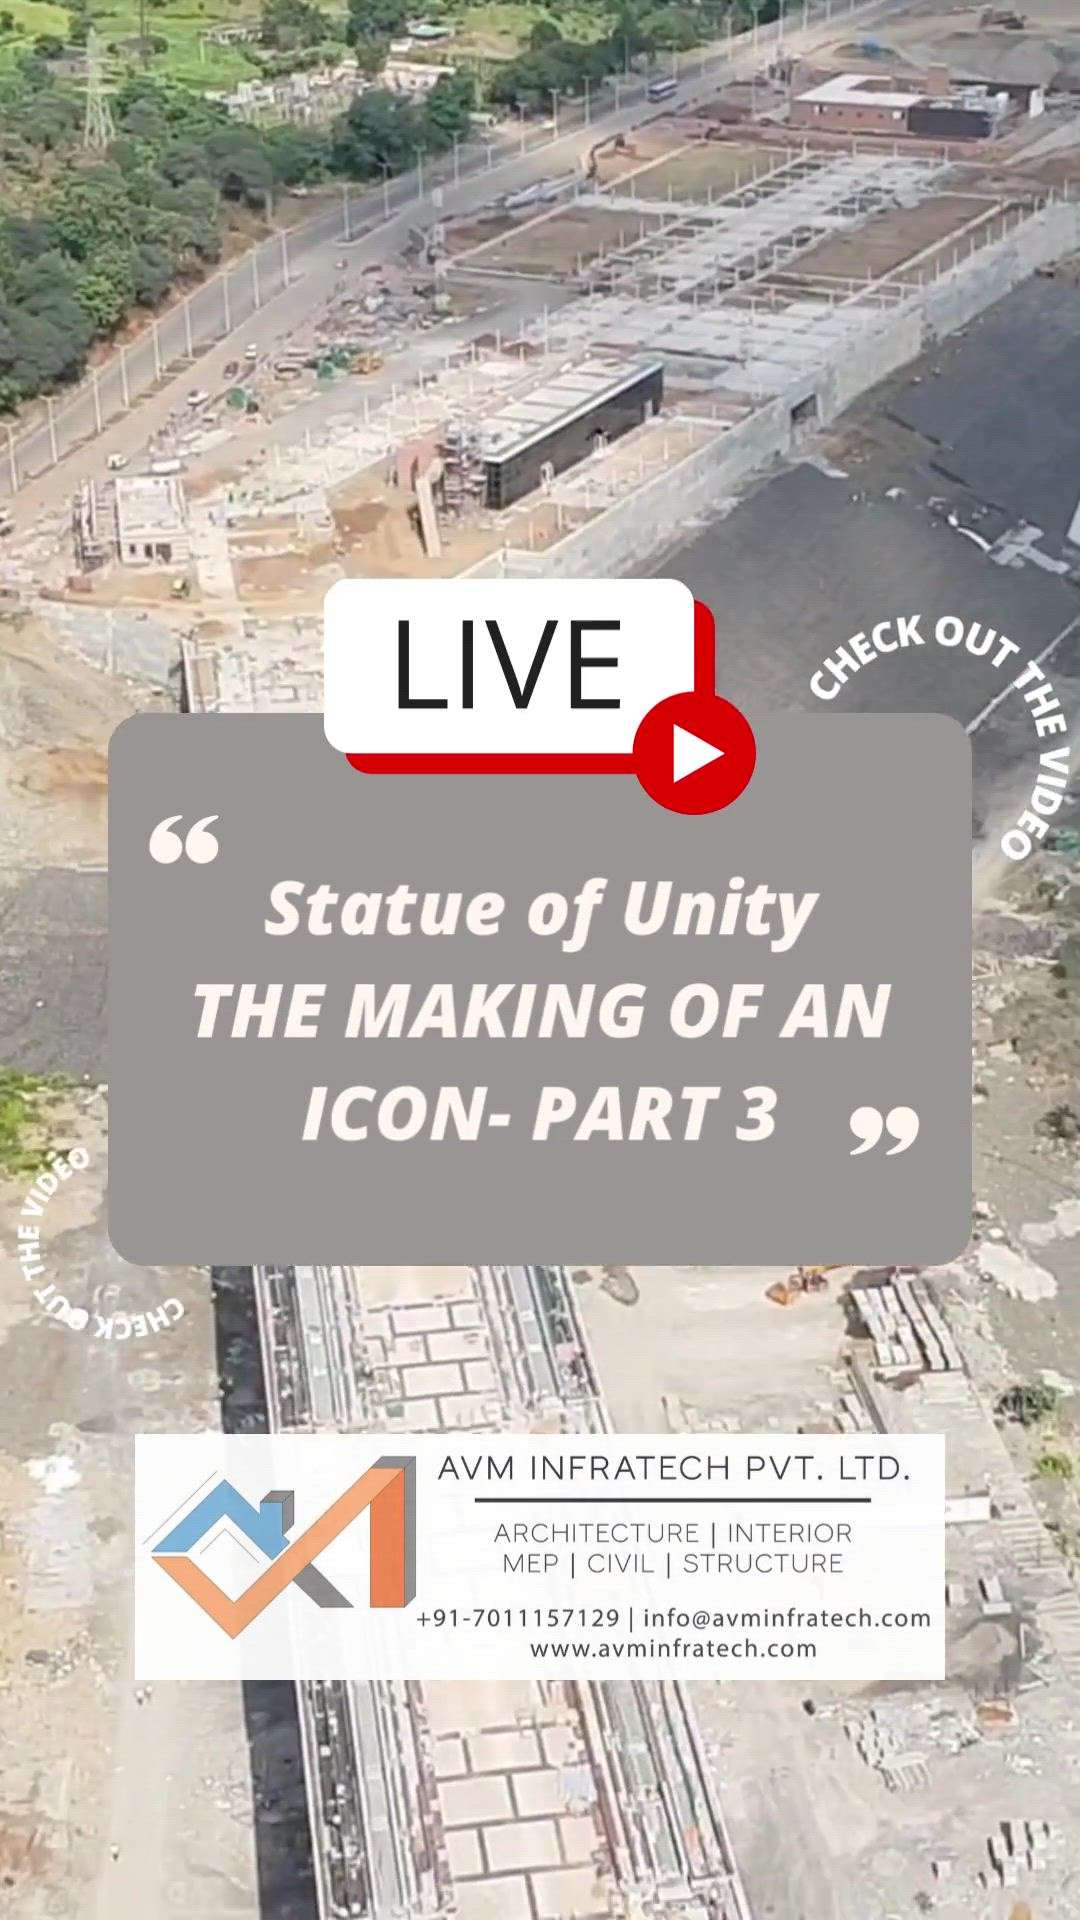 Part 3: Statue of Untiy, The Making of an Icon is now live on our YouTube channel. Go! Check it out. 


Follow us for more such amazing updates.
.
.
#statueofunity #statueofunity🇮🇳 #statueofunitytentcity #statueofunitytourism #statueofunitybyrail #sou #statue #unity #runforunity #sardarvallabhbhaipatel #kevadia #ironman #ironmanofindia #bronze #bronzesculpture #bronzestatue #worldtalleststatue #tallest #talleststatue #tallestbuilding #architect #architecture #interior #avminfratech